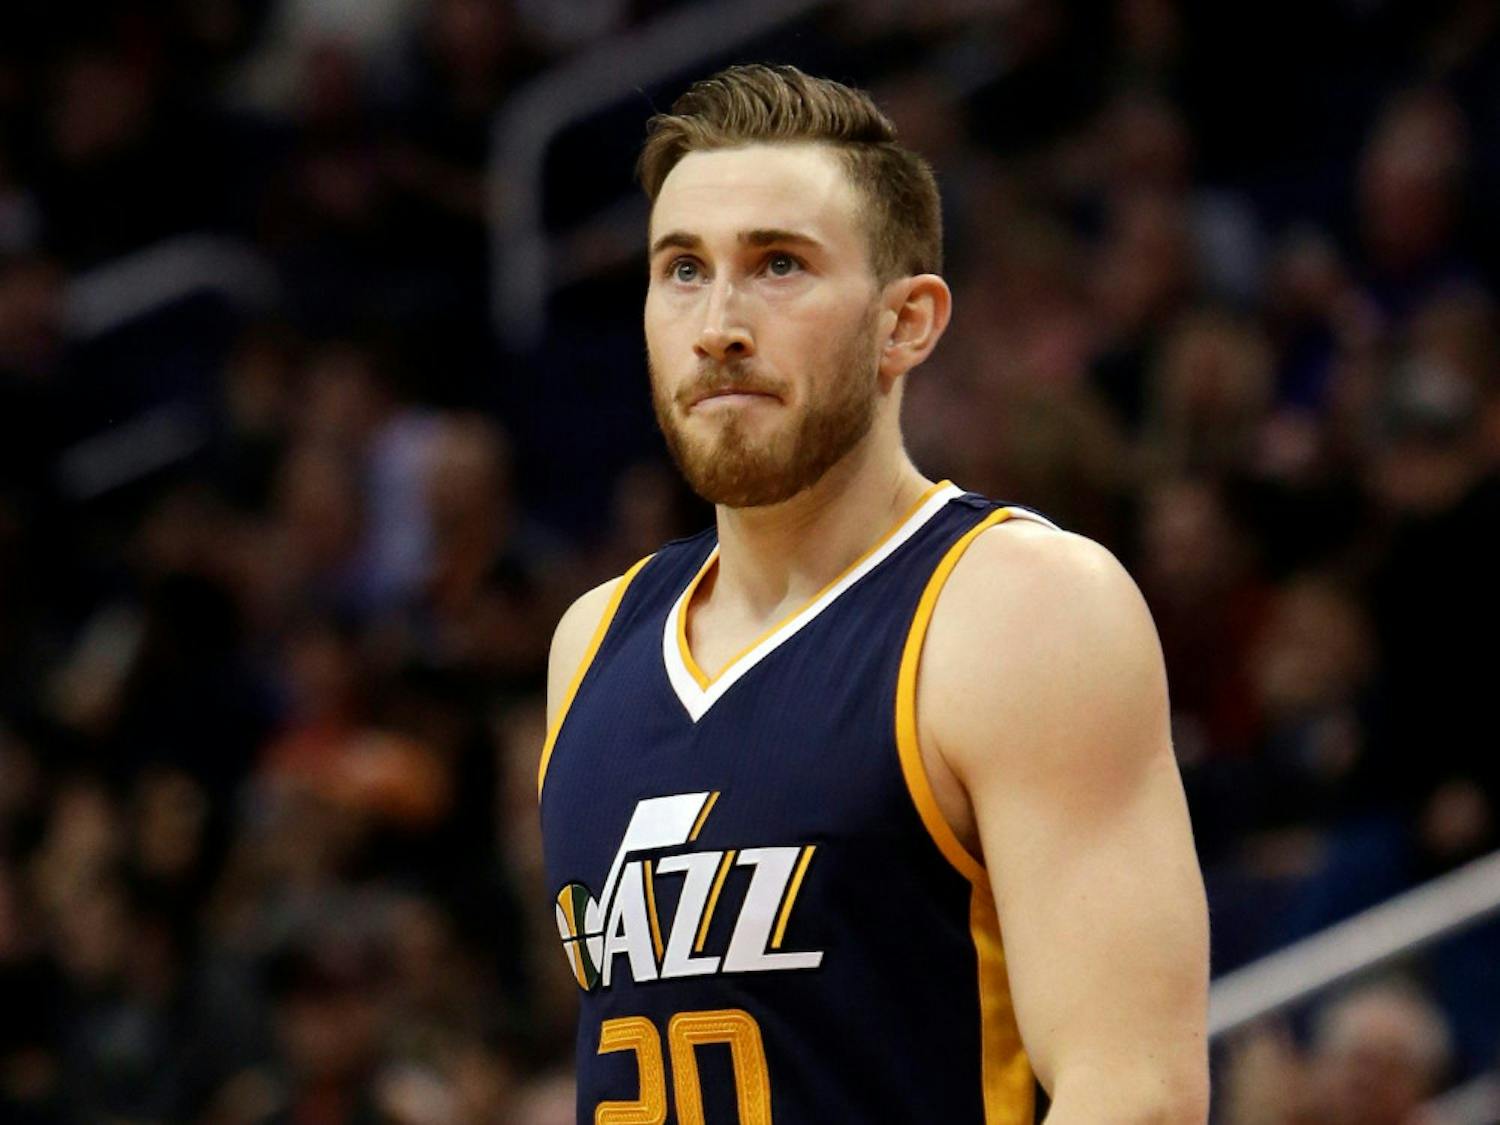 Gordon Hayward surveys the court during a Utah Jazz game in the 2016-17 NBA season. Hayward recently agreed to terms on a four-year deal with the Boston Celtics.